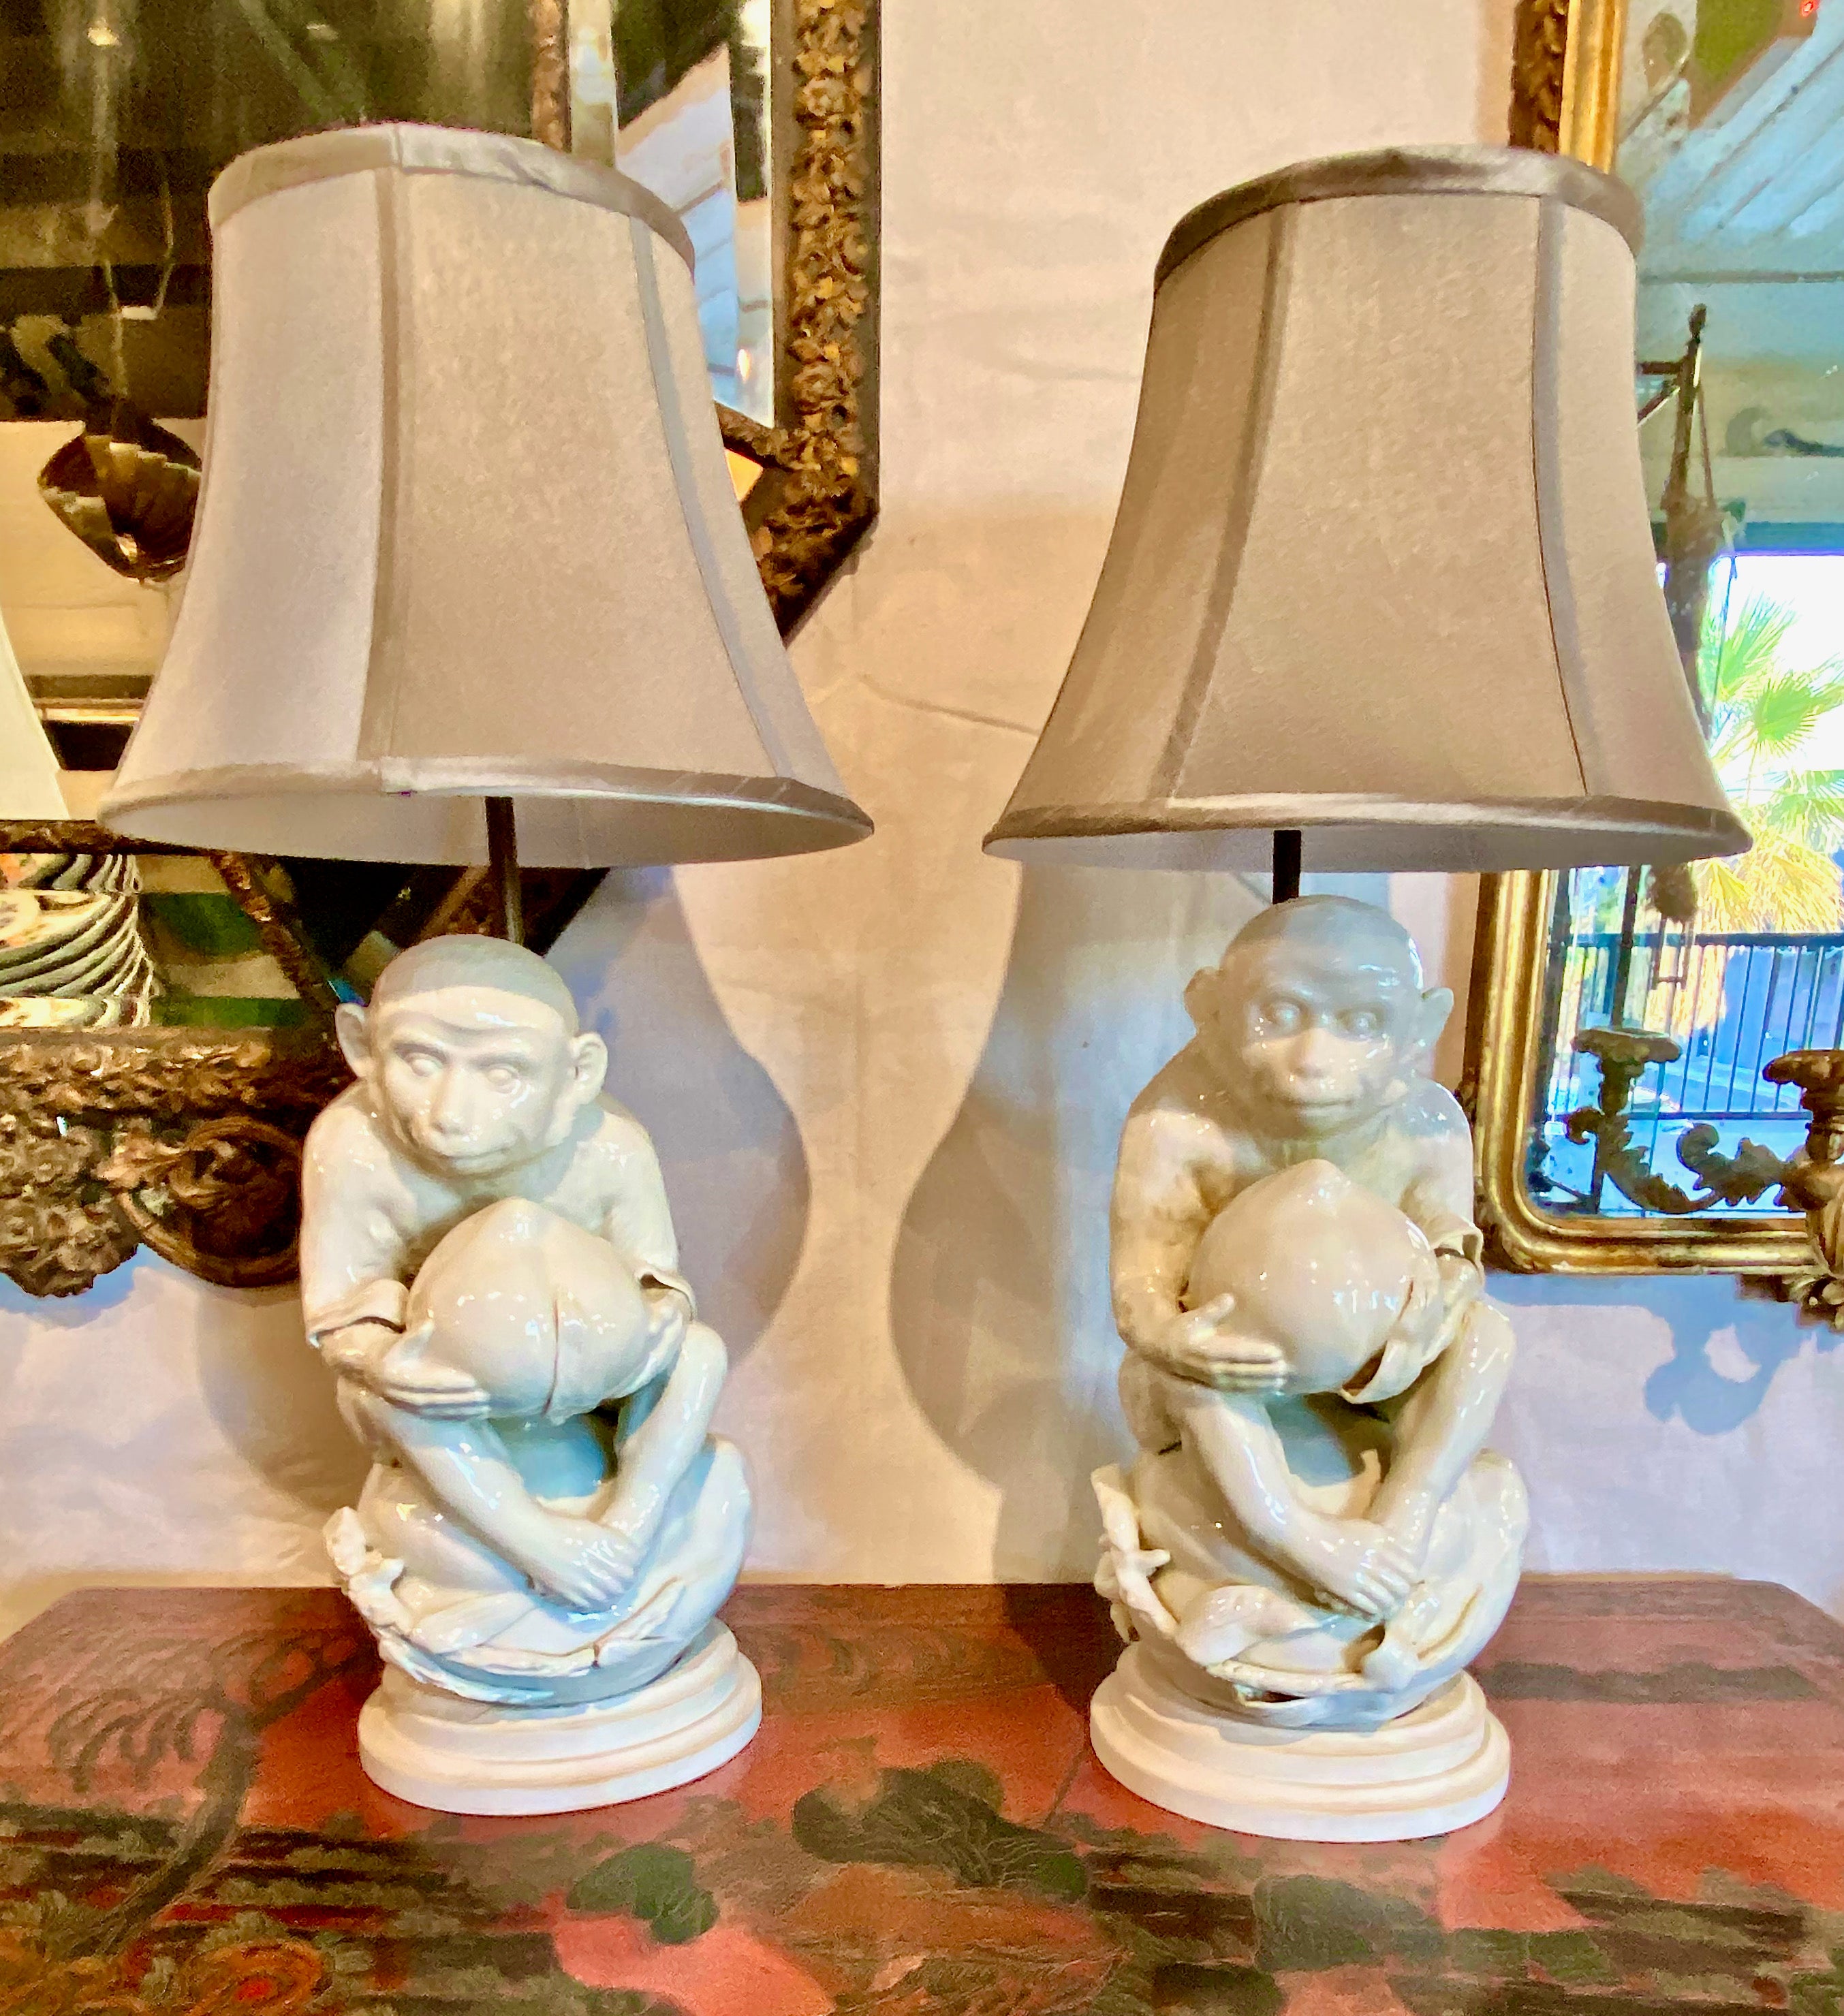 This is a great pair of unique mid-century Coastal Style blanc de chine monkey lamps. I believe that the monkey sculptures are German porcelain and date to the late 19th or early 20th century as there is a number to the bottom and the porcelain does